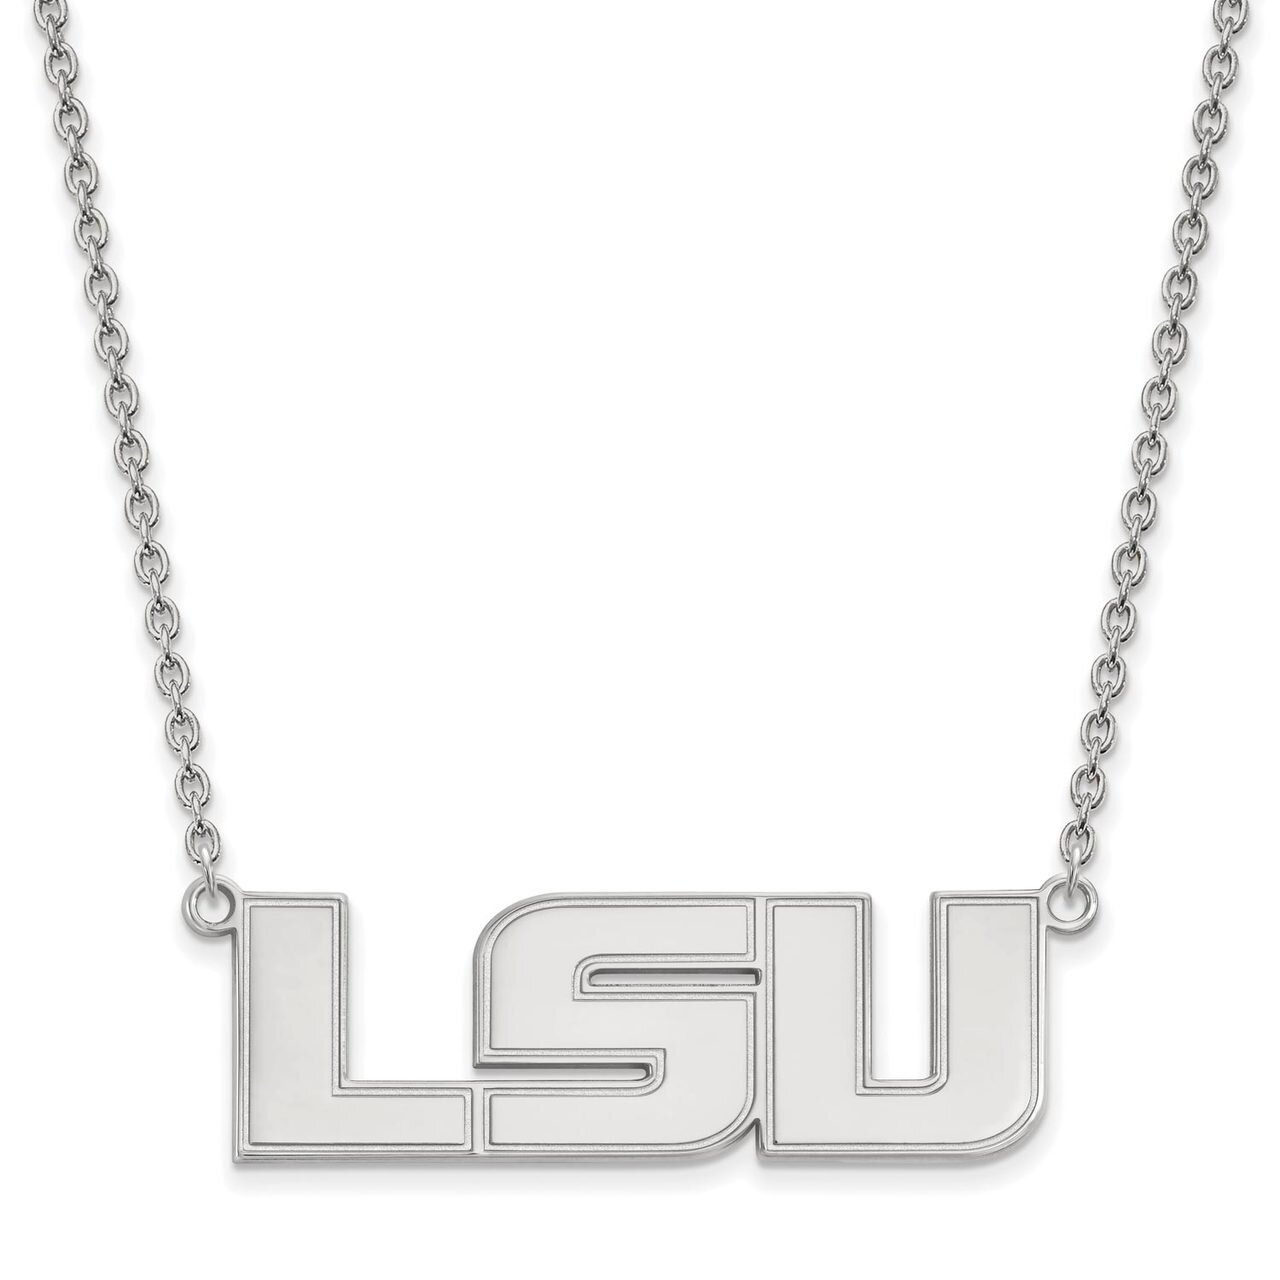 Louisiana State University Large Pendant with Chain Necklace 14k White Gold 4W010LSU-18